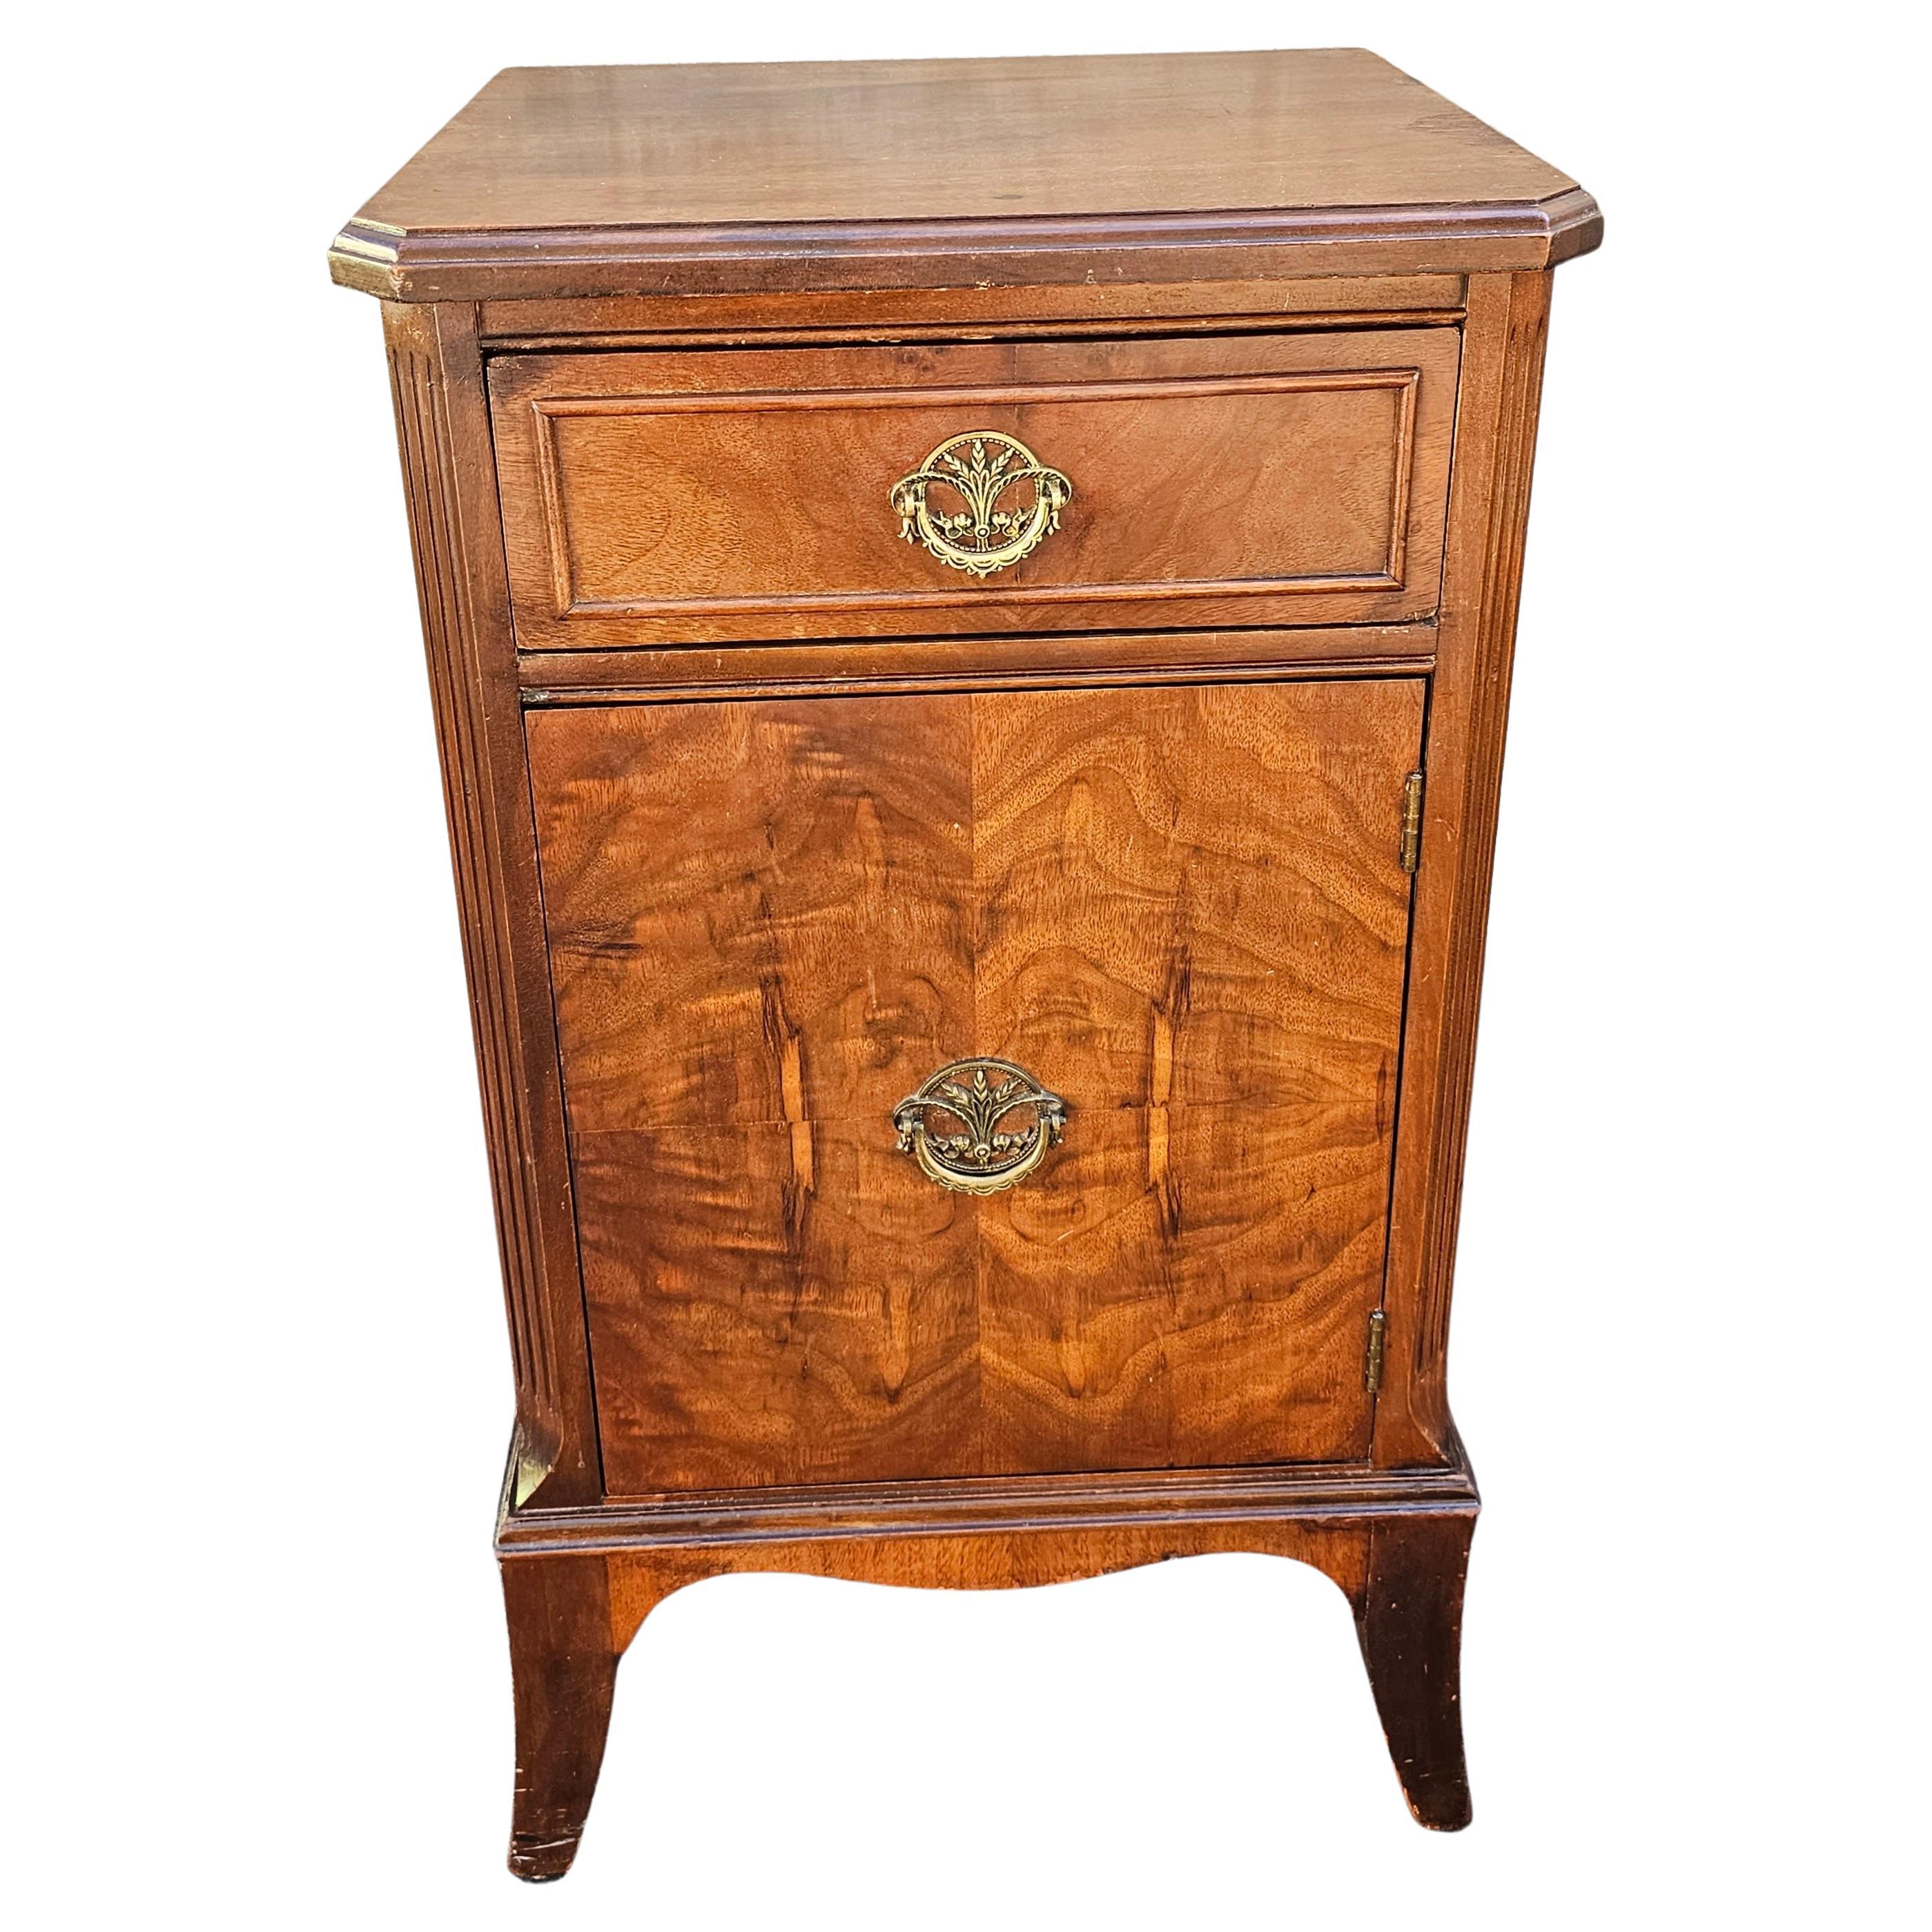 Early 20th Century Federal Style Burl Mahogany Nightstand Side Table Cabinet